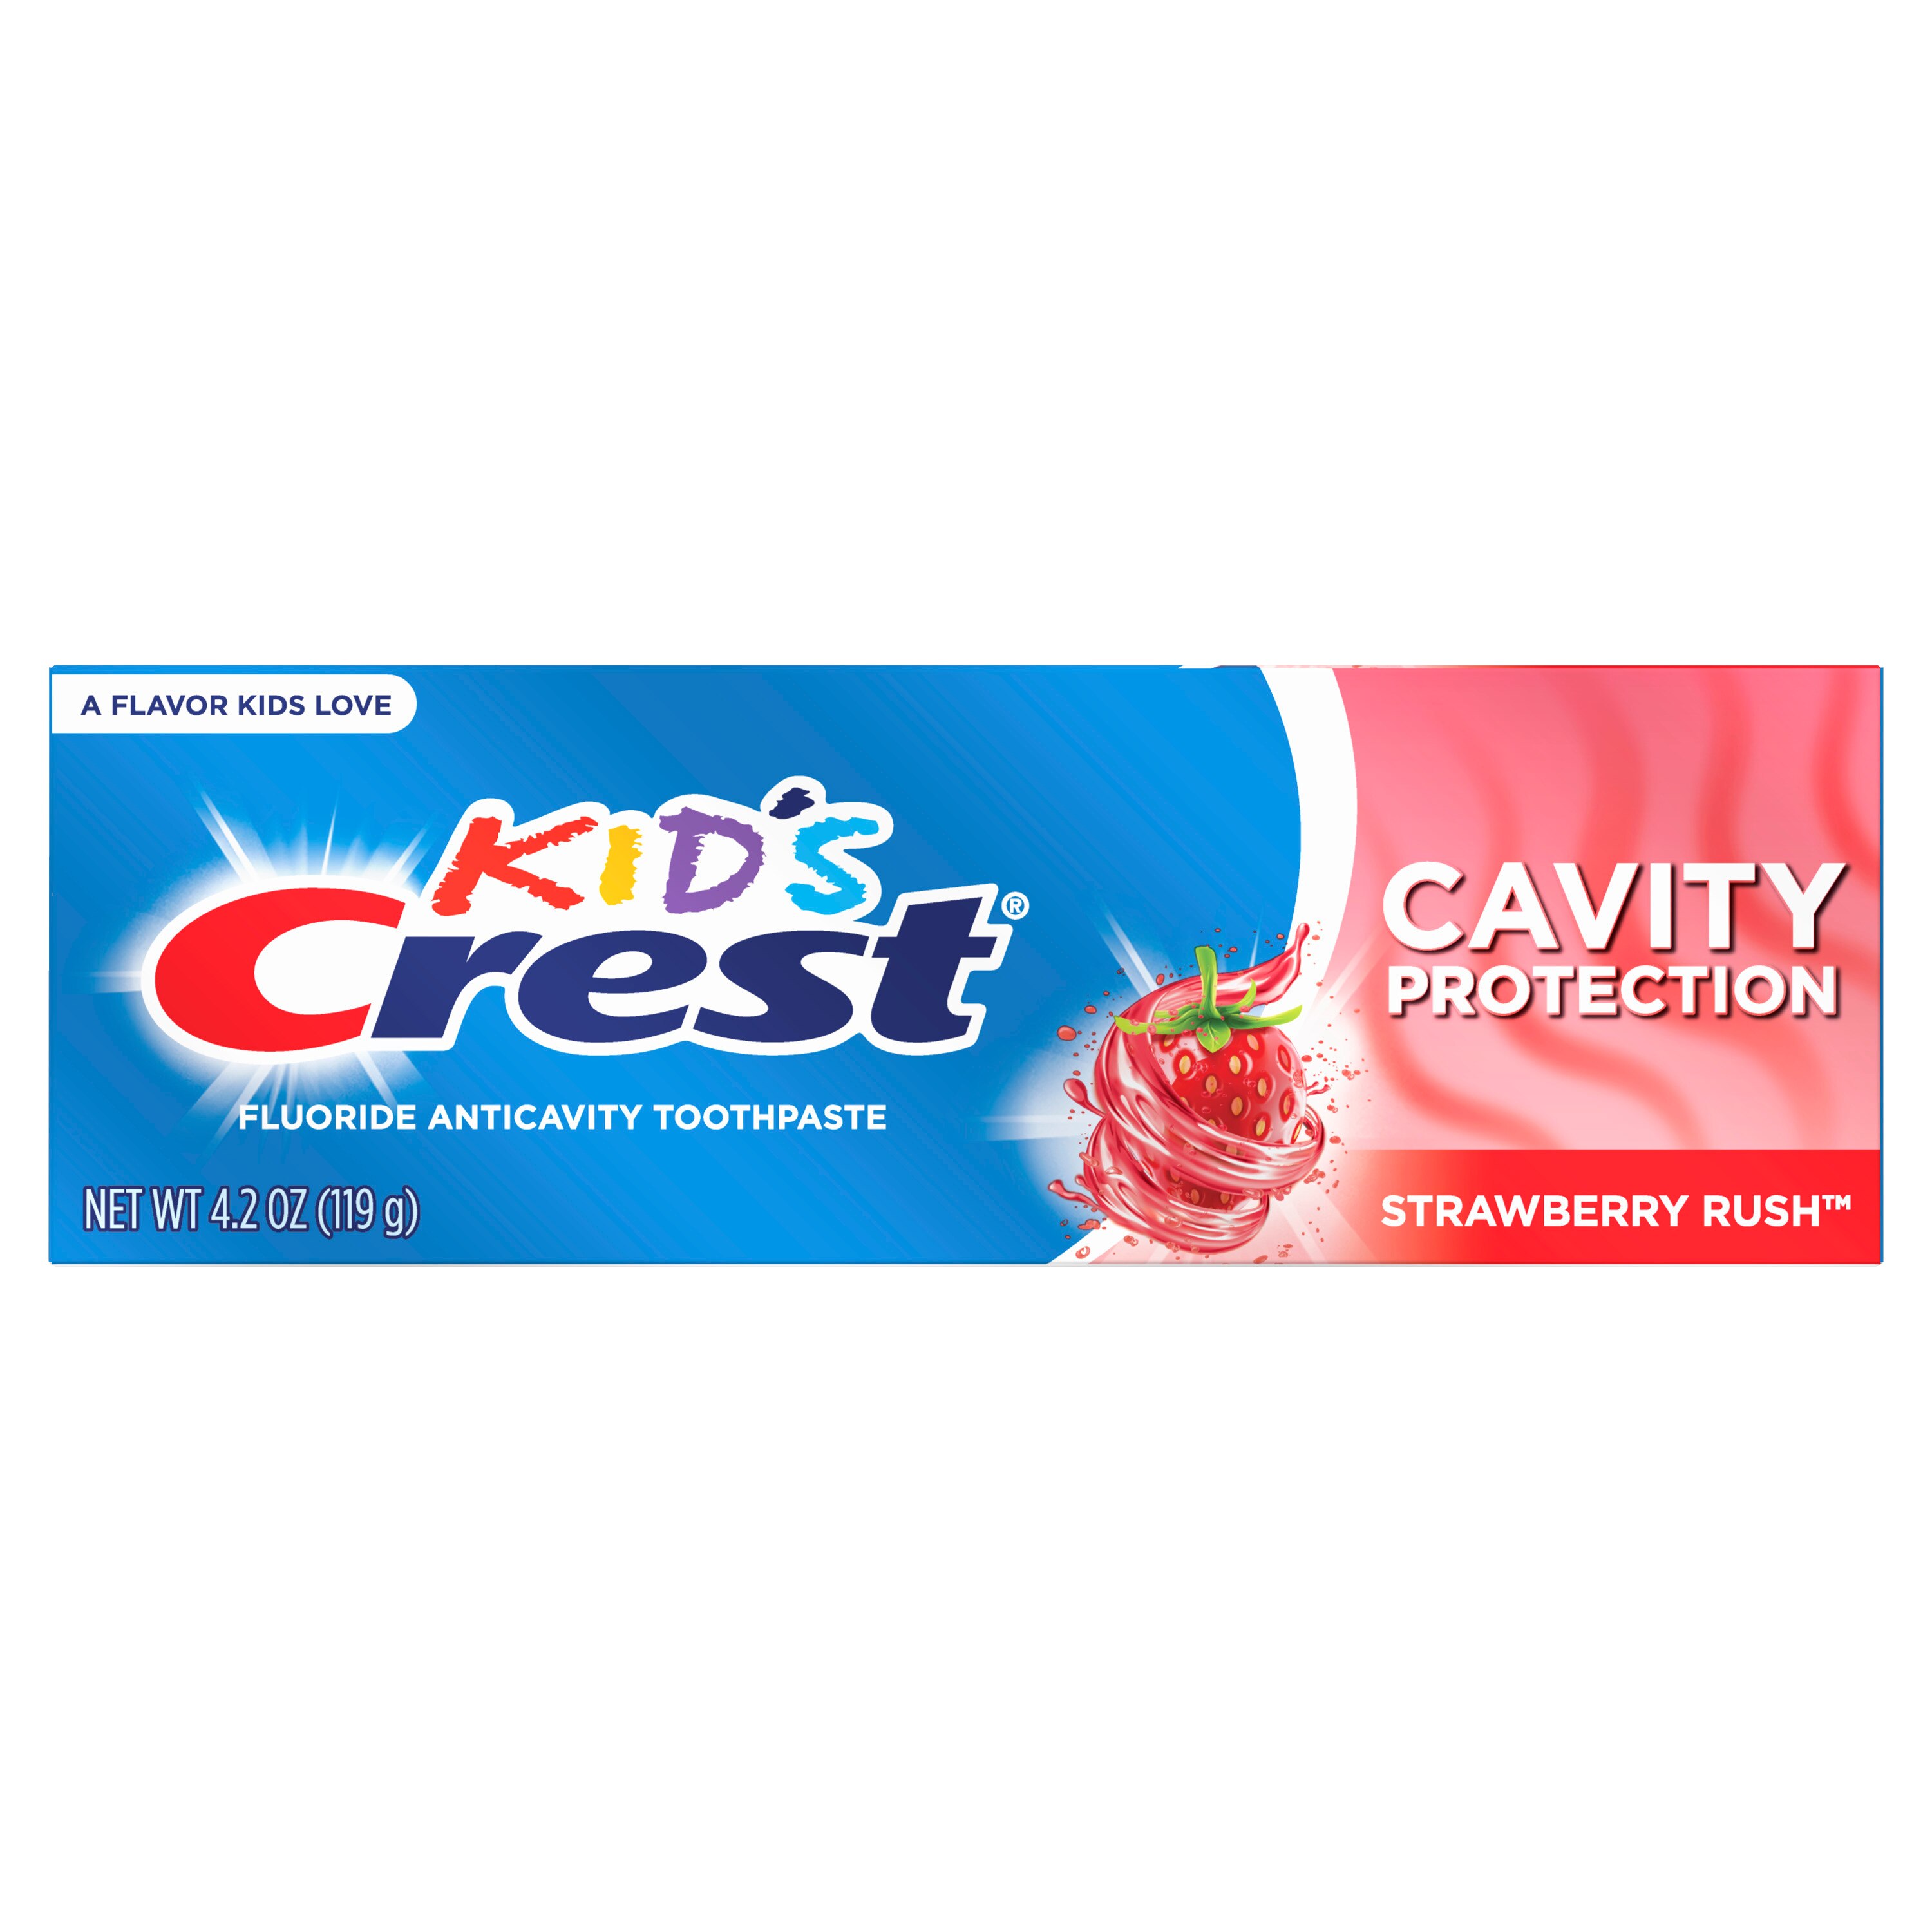 Crest Kid's Cavity Protection Fluoride Toothpaste, Strawberry Rush, 4.2 OZ